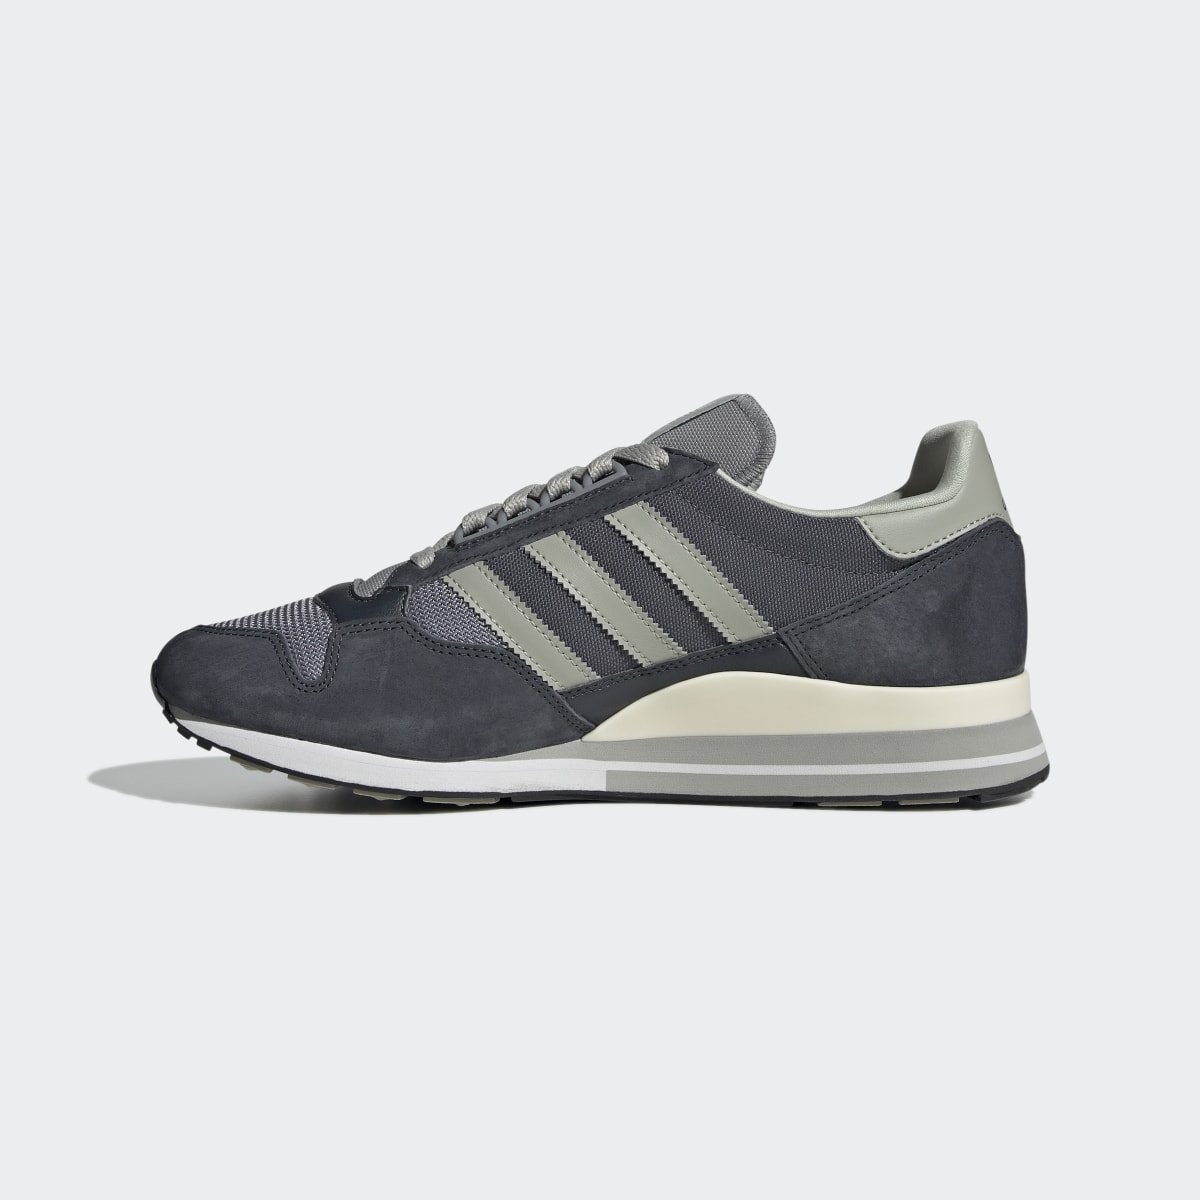 Adidas ZX 500 Shoes. 7